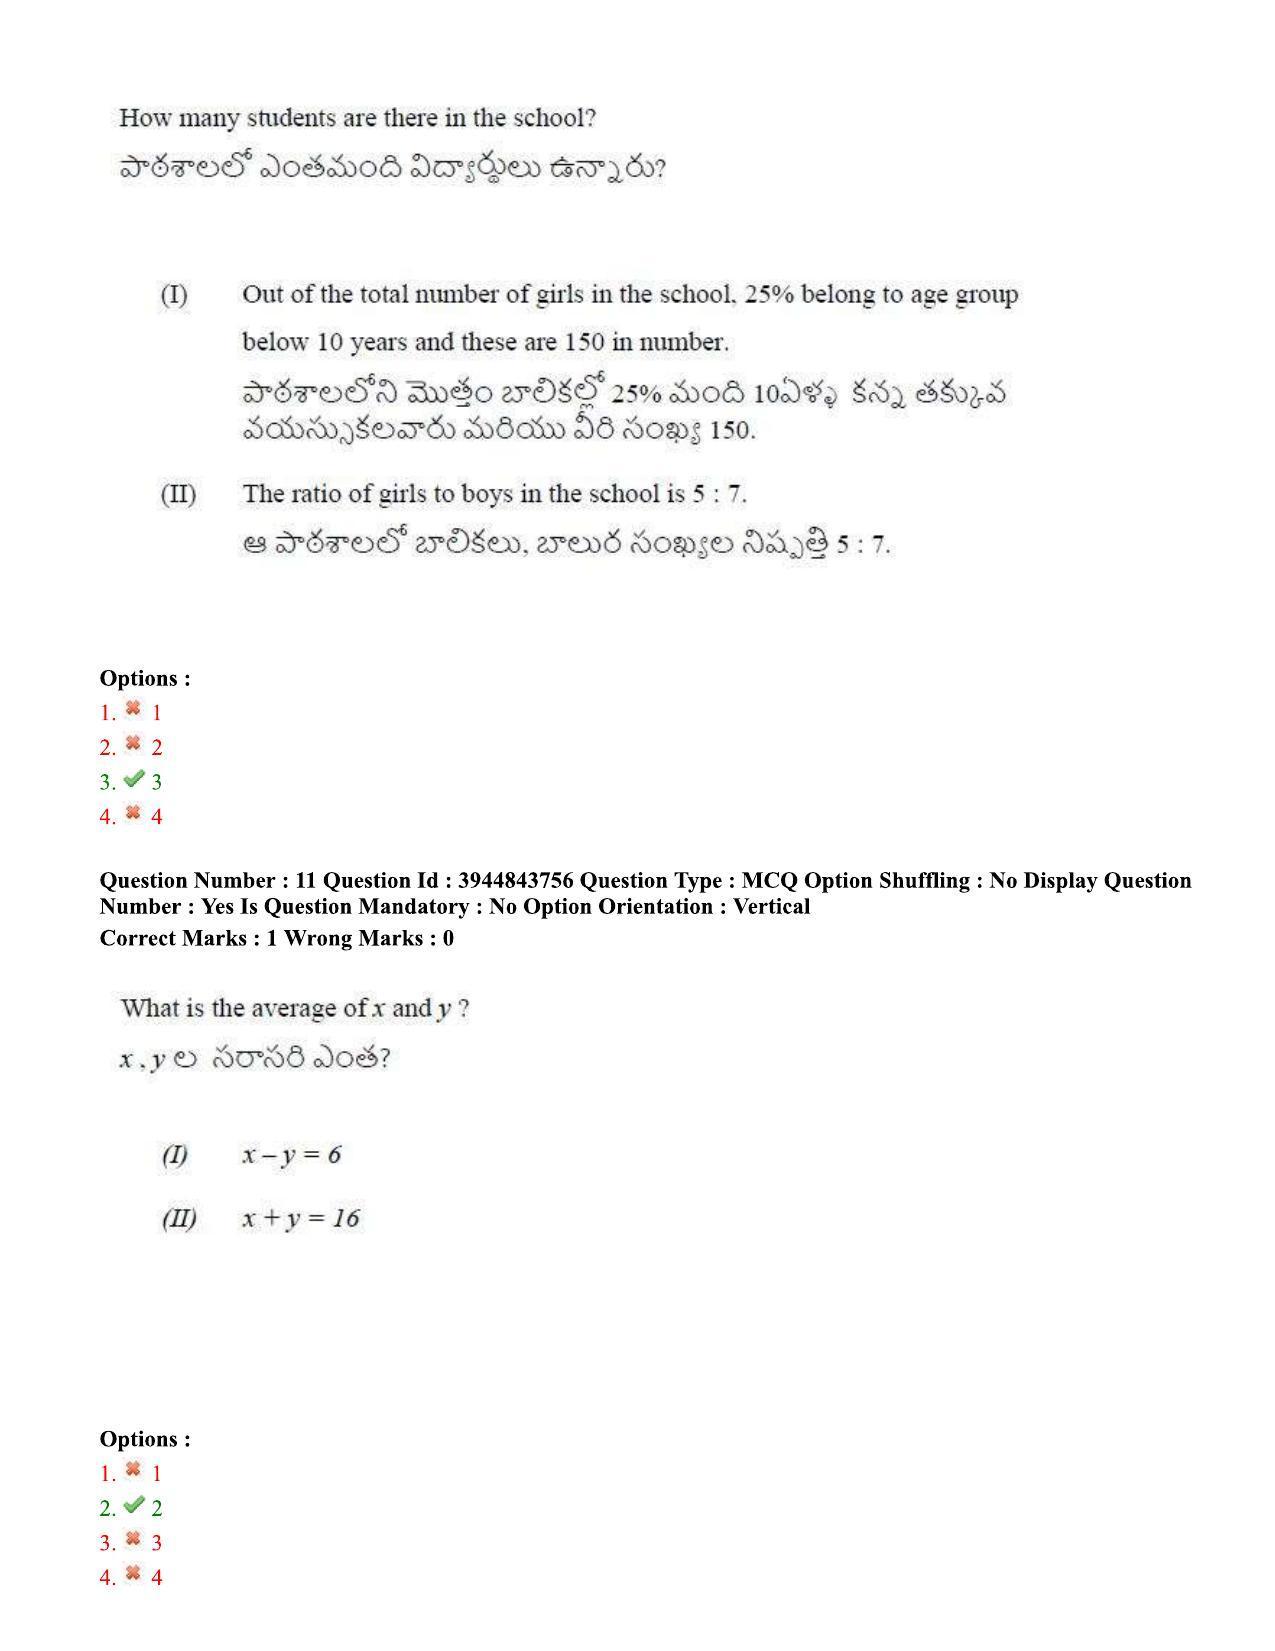 TS ICET 2020 Question Paper 1 - Oct 1, 2020	 - Page 9